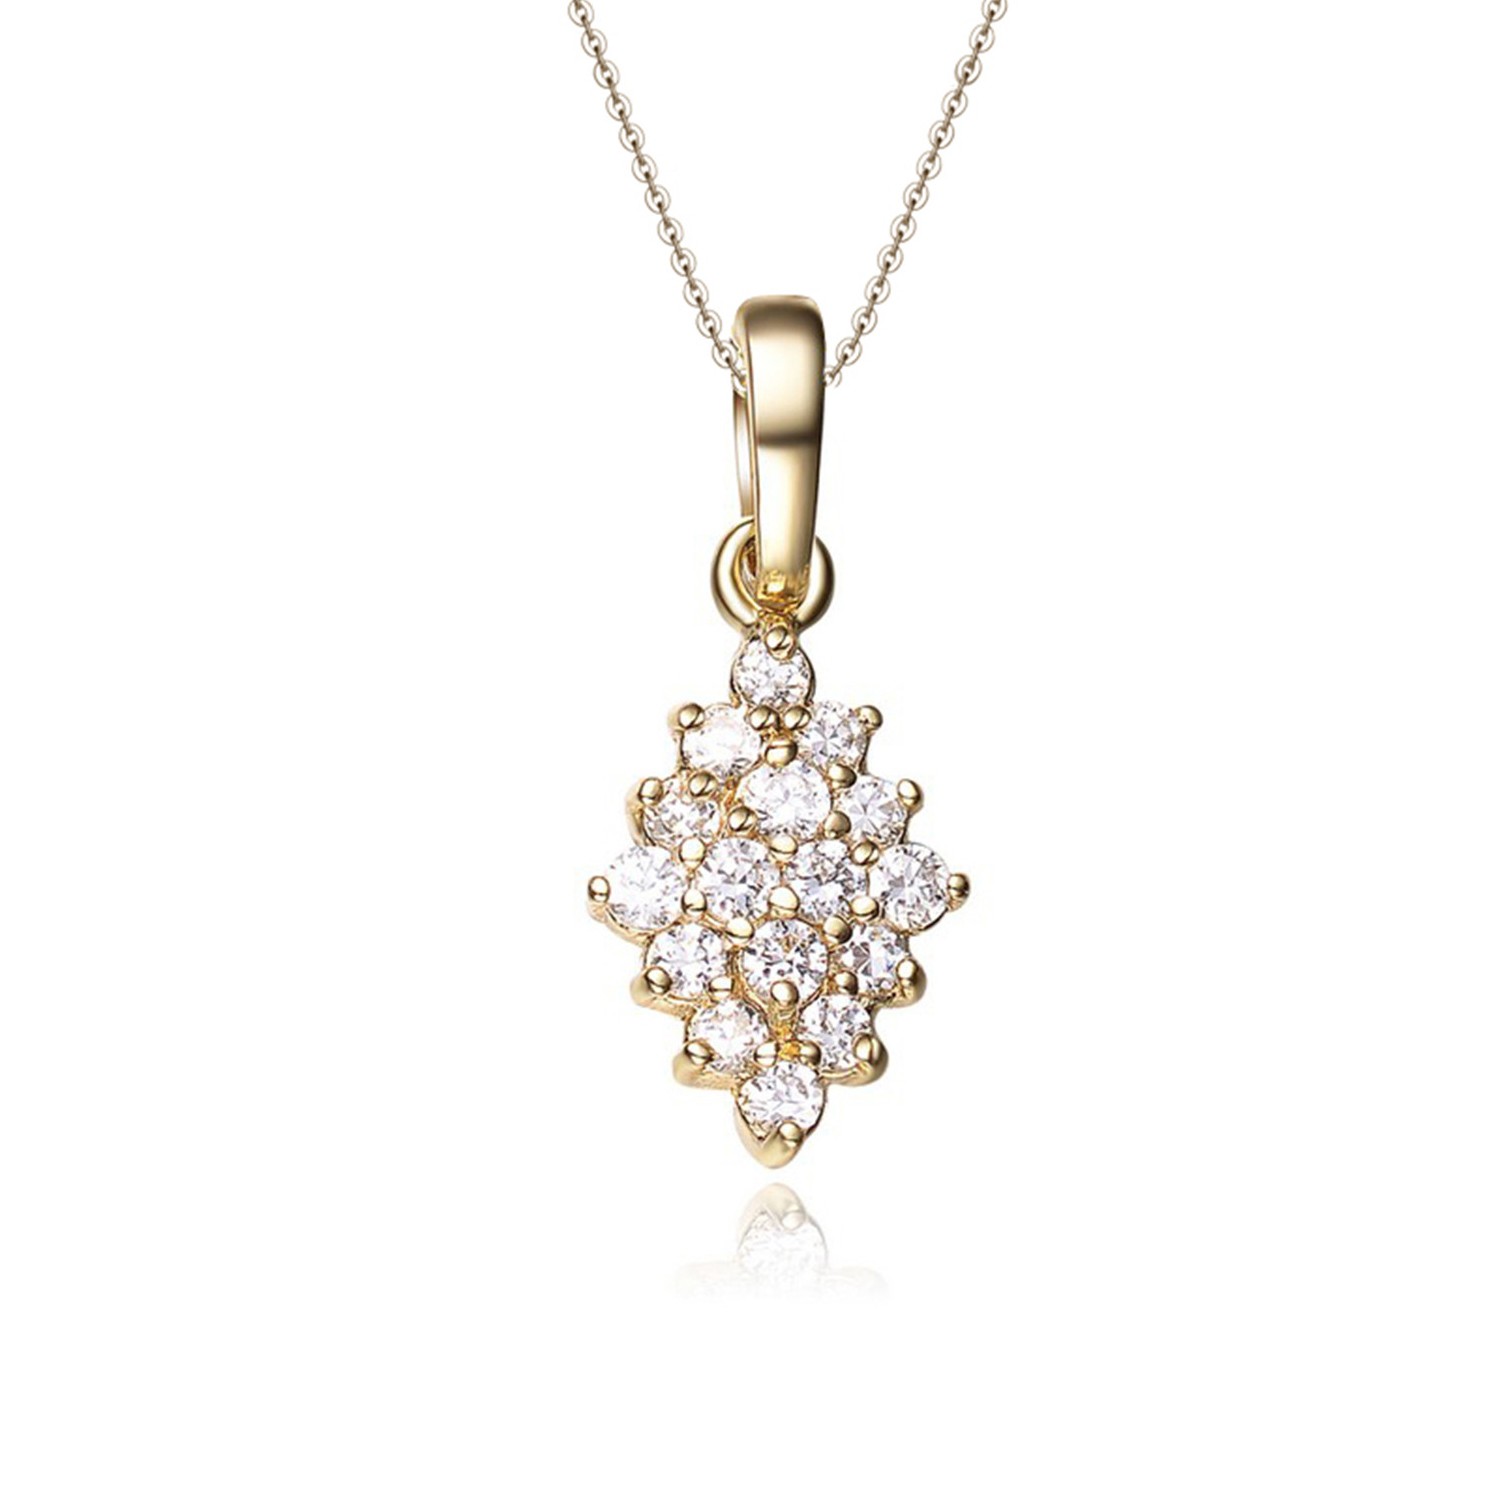 Dainty 925 silver gold plated pendant necklace women jewelry elegant necklace with cubic zirconia